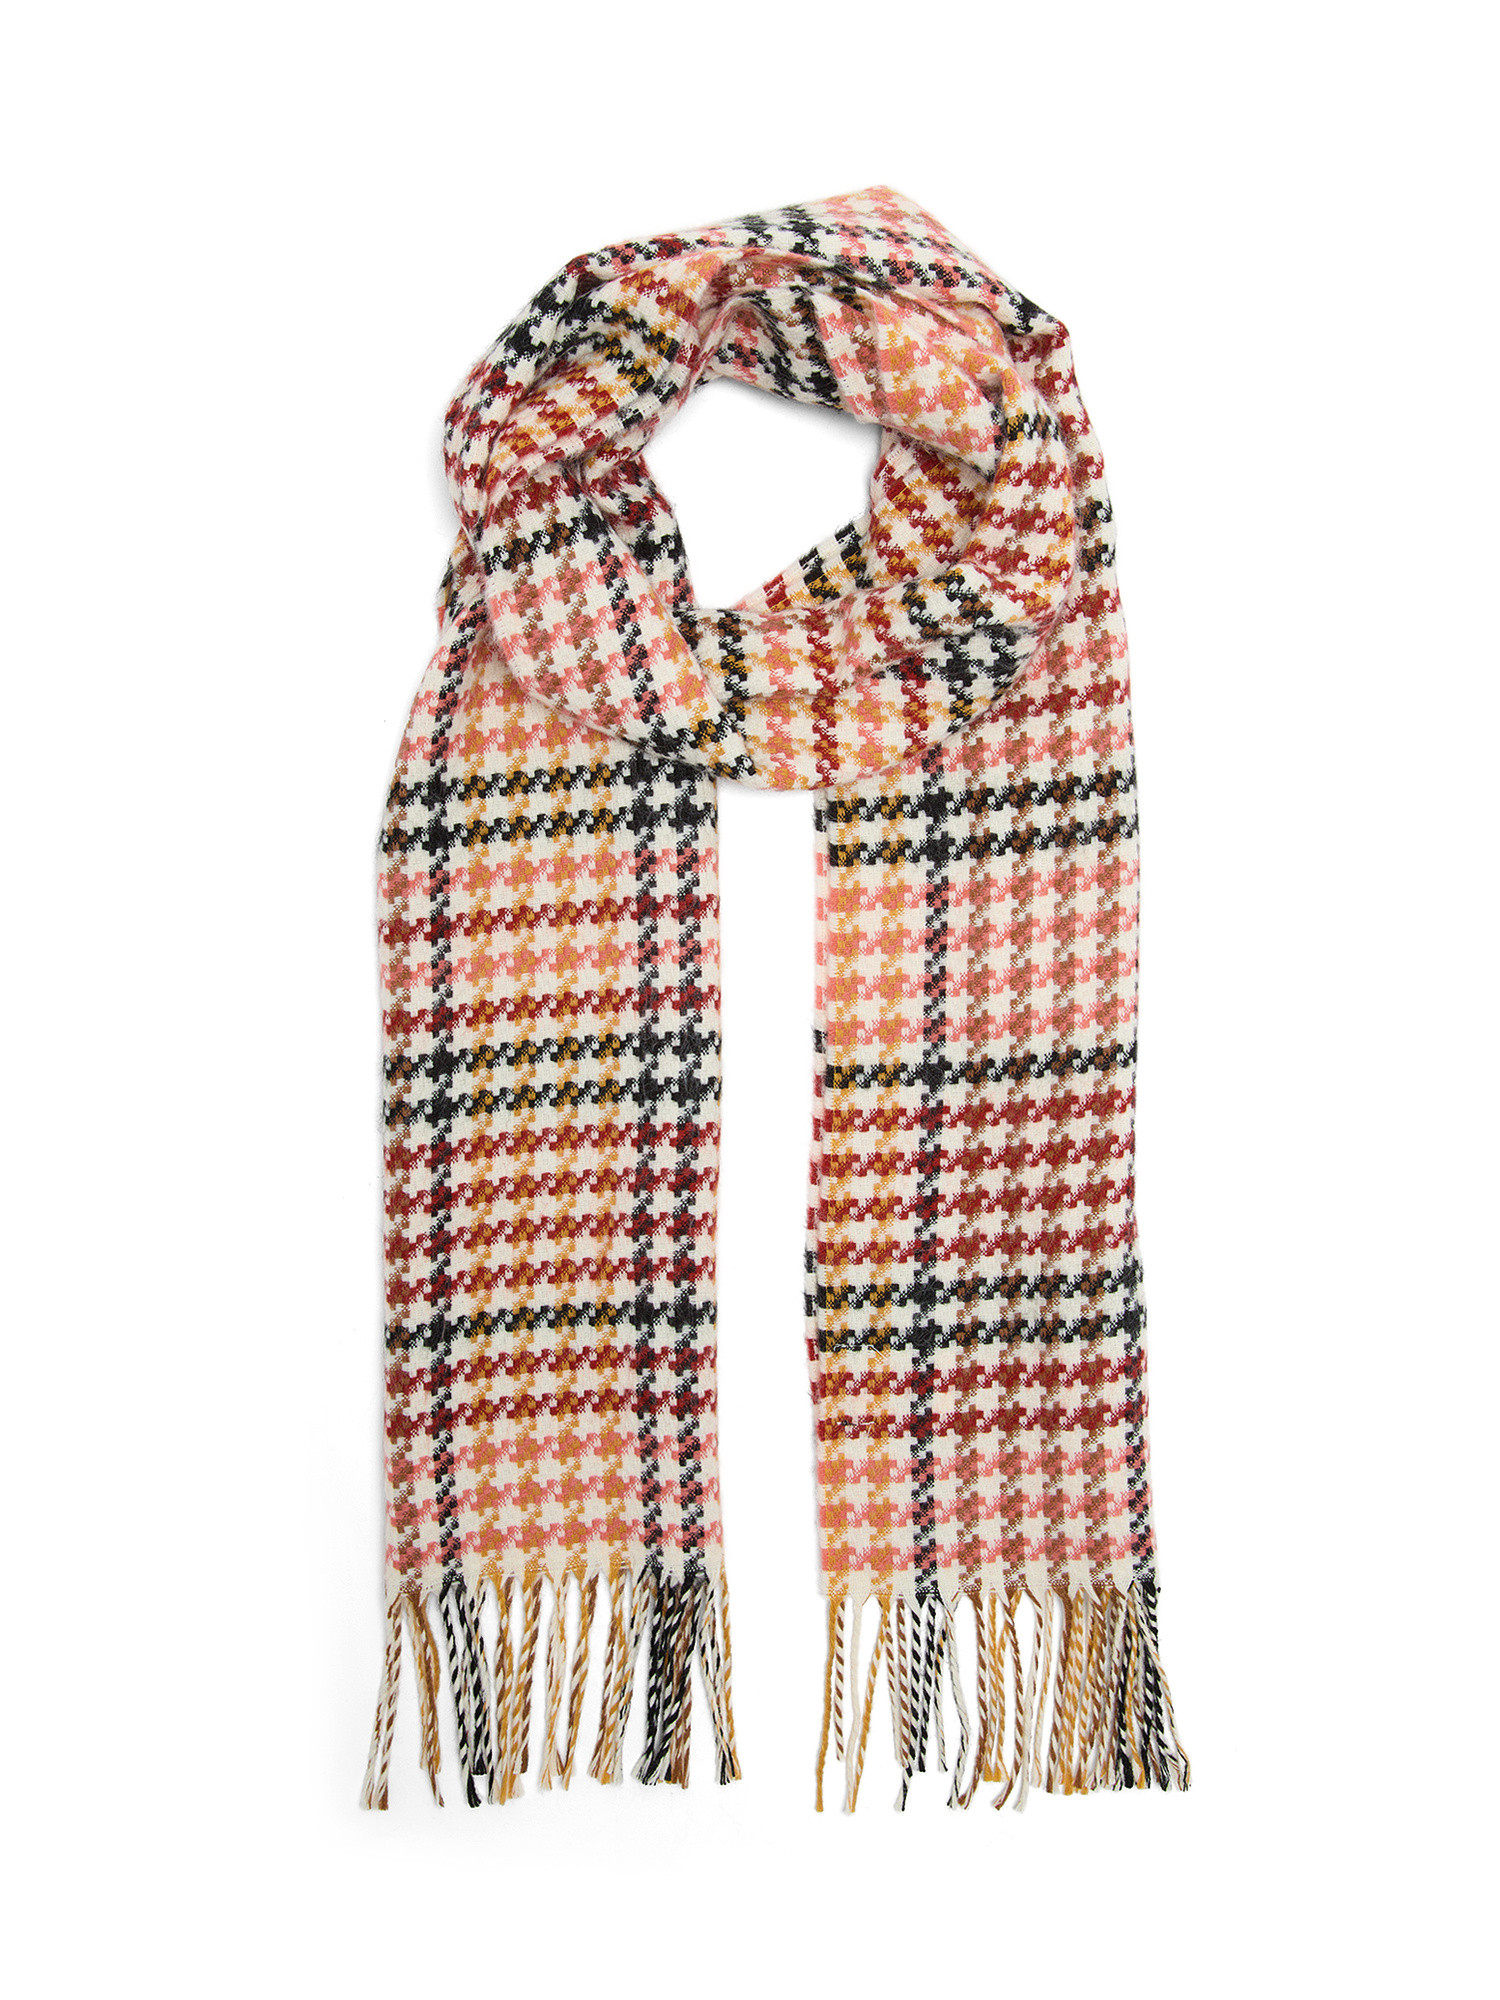 Koan - Houndstooth and check scarf, Multicolor, large image number 0